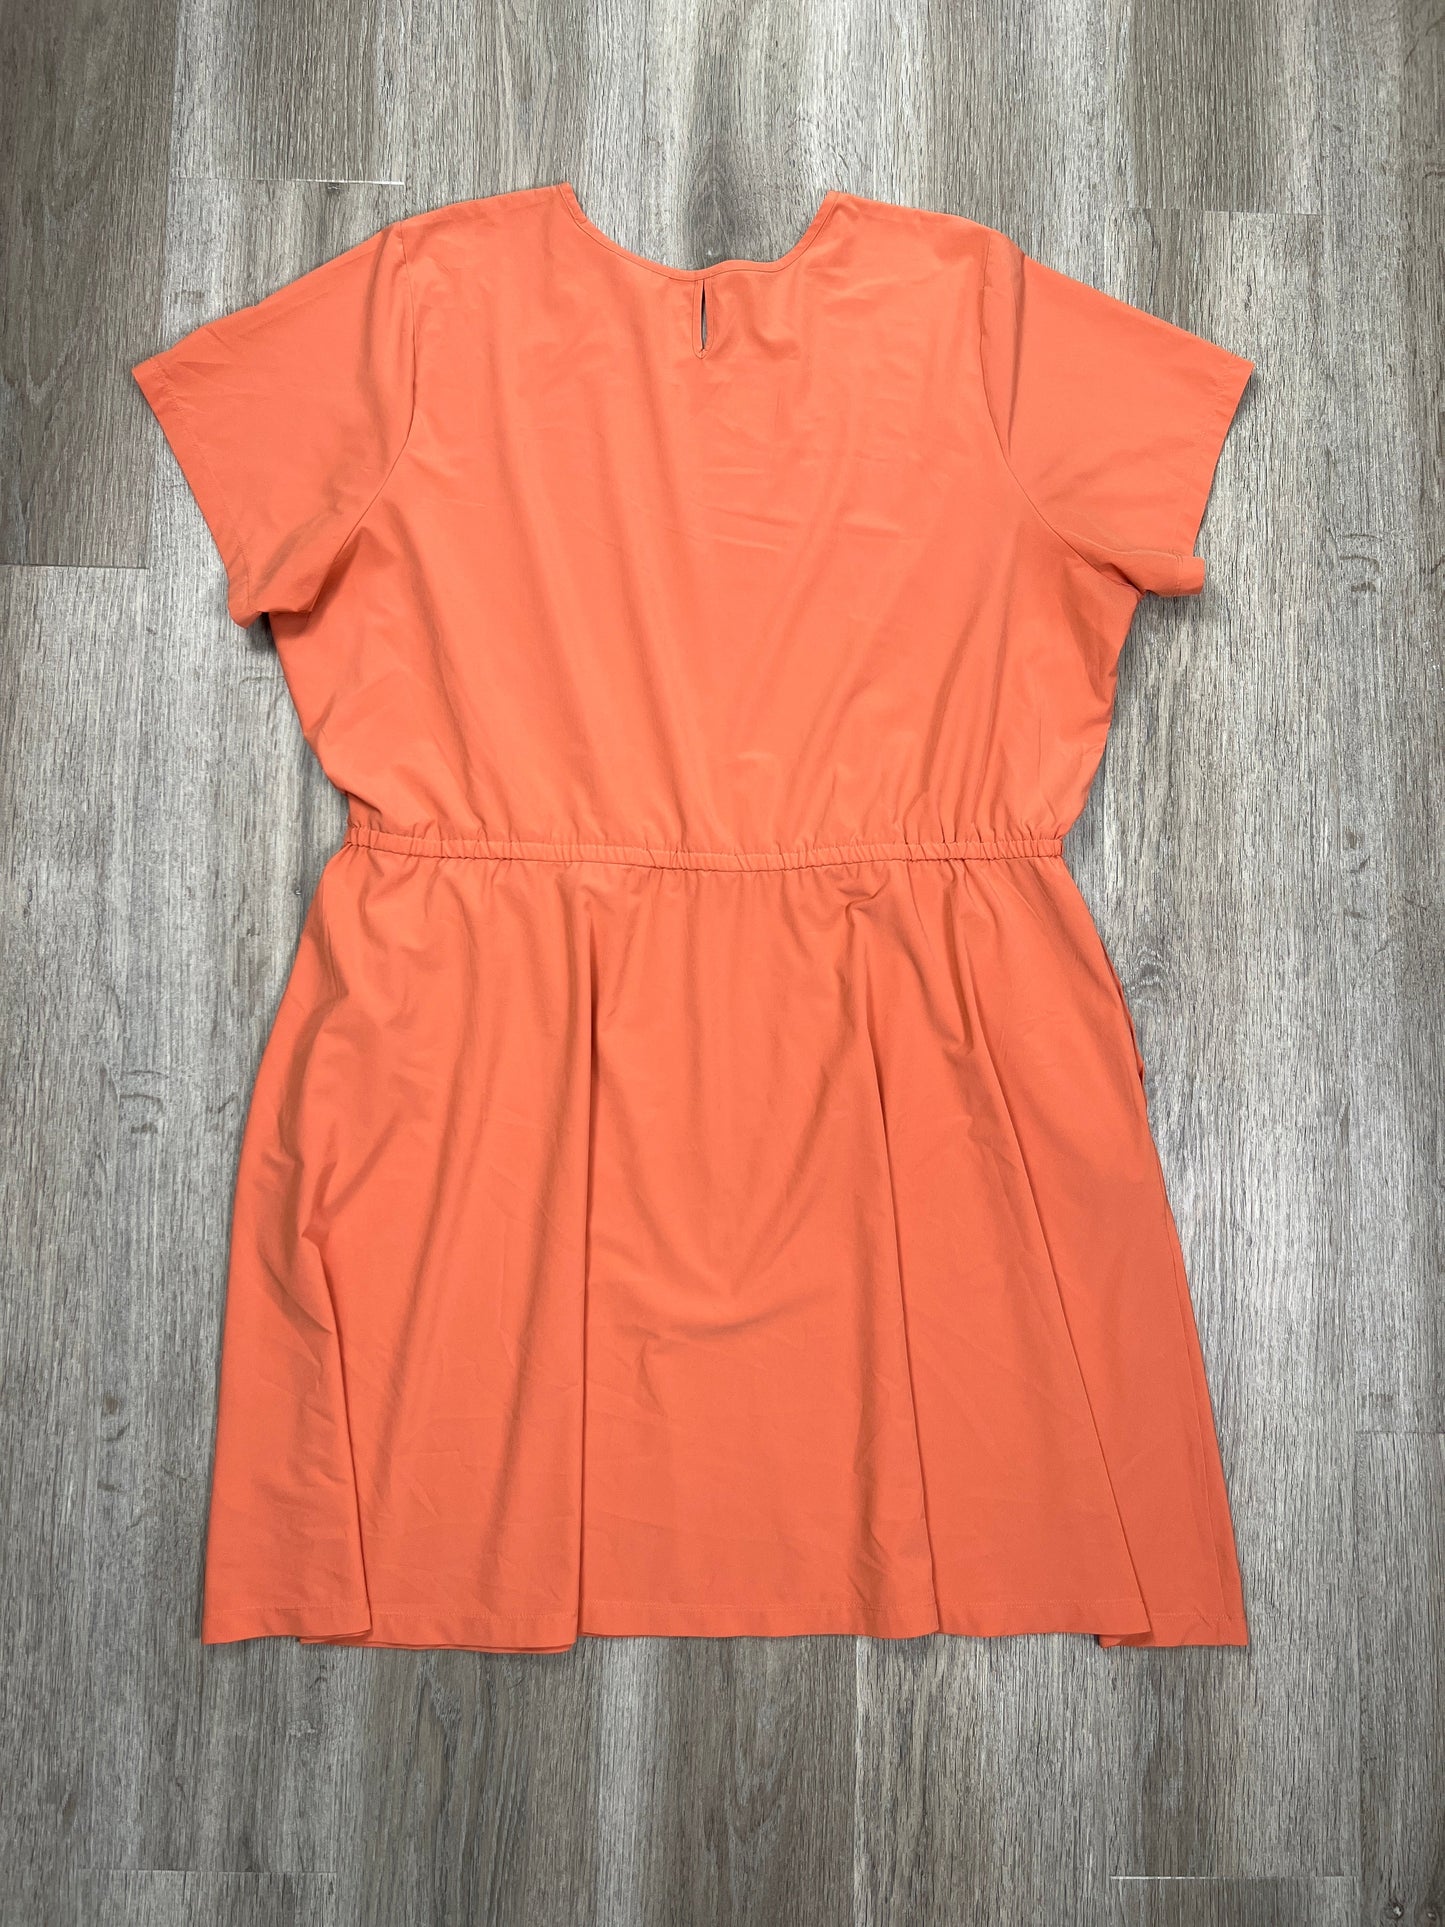 Dress Casual Short By Duluth Trading  Size: 2x